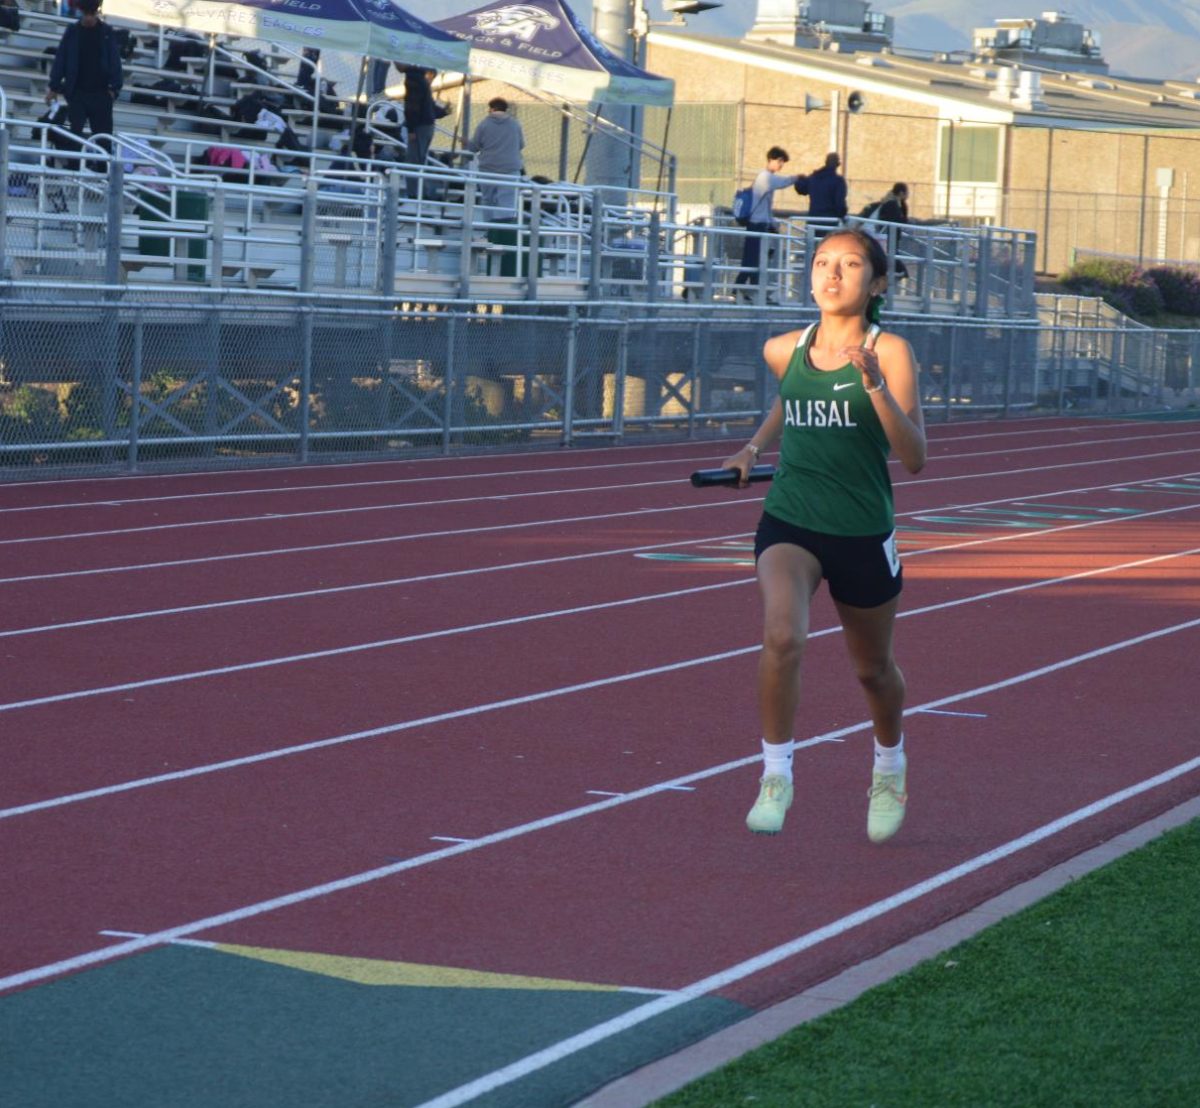 Starting+the+season+strong%0Ain+the+4x400+relay+at+the+Salinas+City+invitational%2C+freshman%0AYaretzi+Cornelio+anchored+and+helped+the+team+finish+1st%2C+with%0Aa+time+of+4%3A43.58.+The+team+ran+a+season+best+4%3A26.19+in+the%0Ahome+meet+versus+Alvarez+on+March+19th%2C+beating+them+by+20%0Aseconds.+According+to+Coach+Munoz%2C+Cornelio+has+made+the%0Atop+20+in+school+history+in+the+800%2C+1600%2C+and+3200+as+a%0Afreshman.